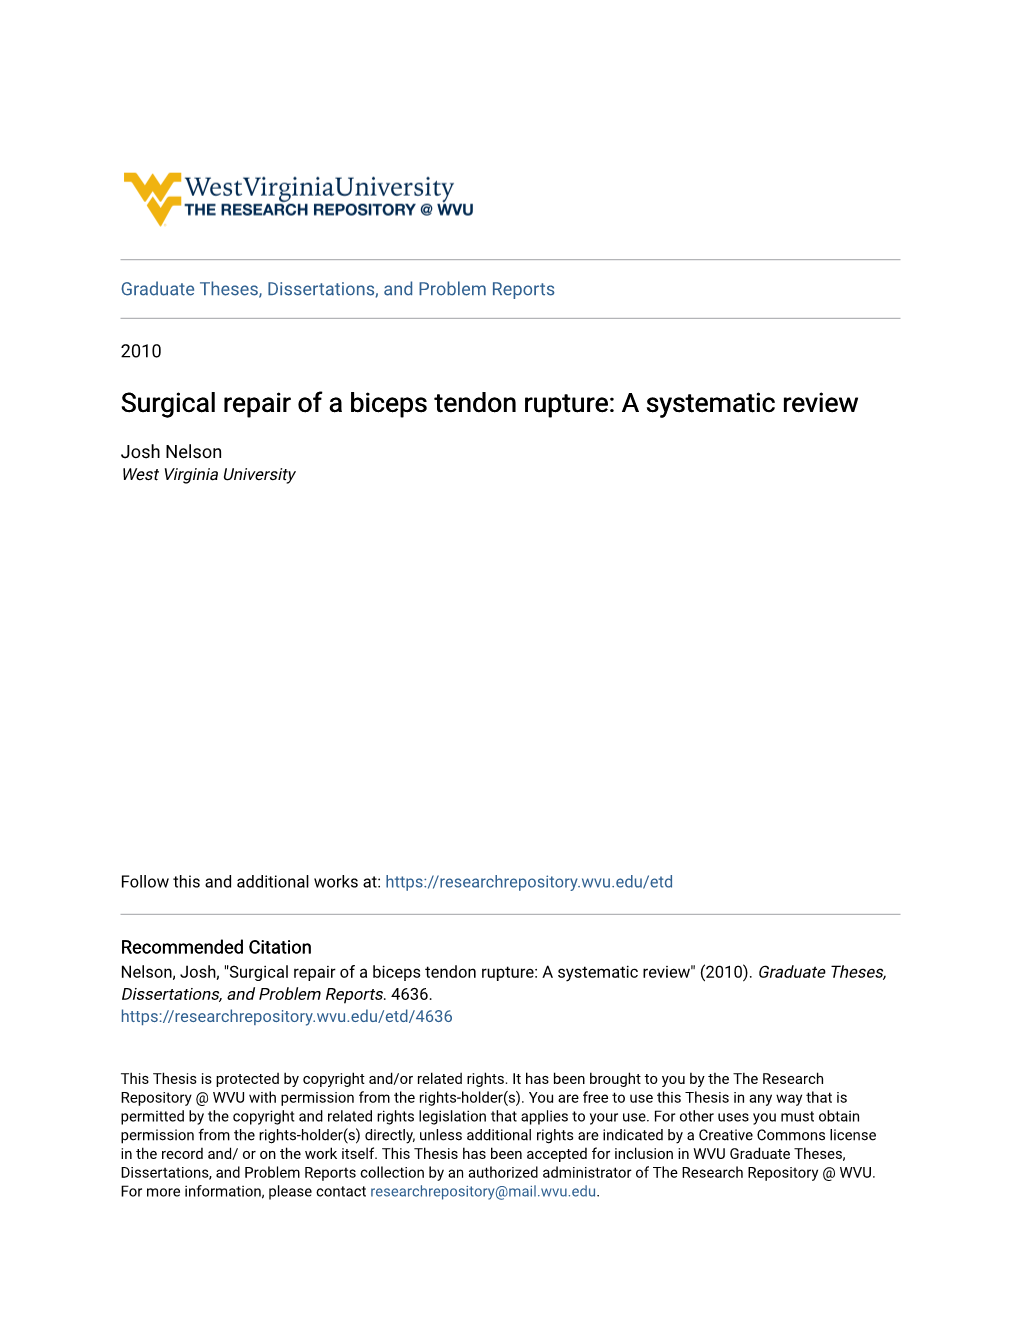 Surgical Repair of a Biceps Tendon Rupture: a Systematic Review